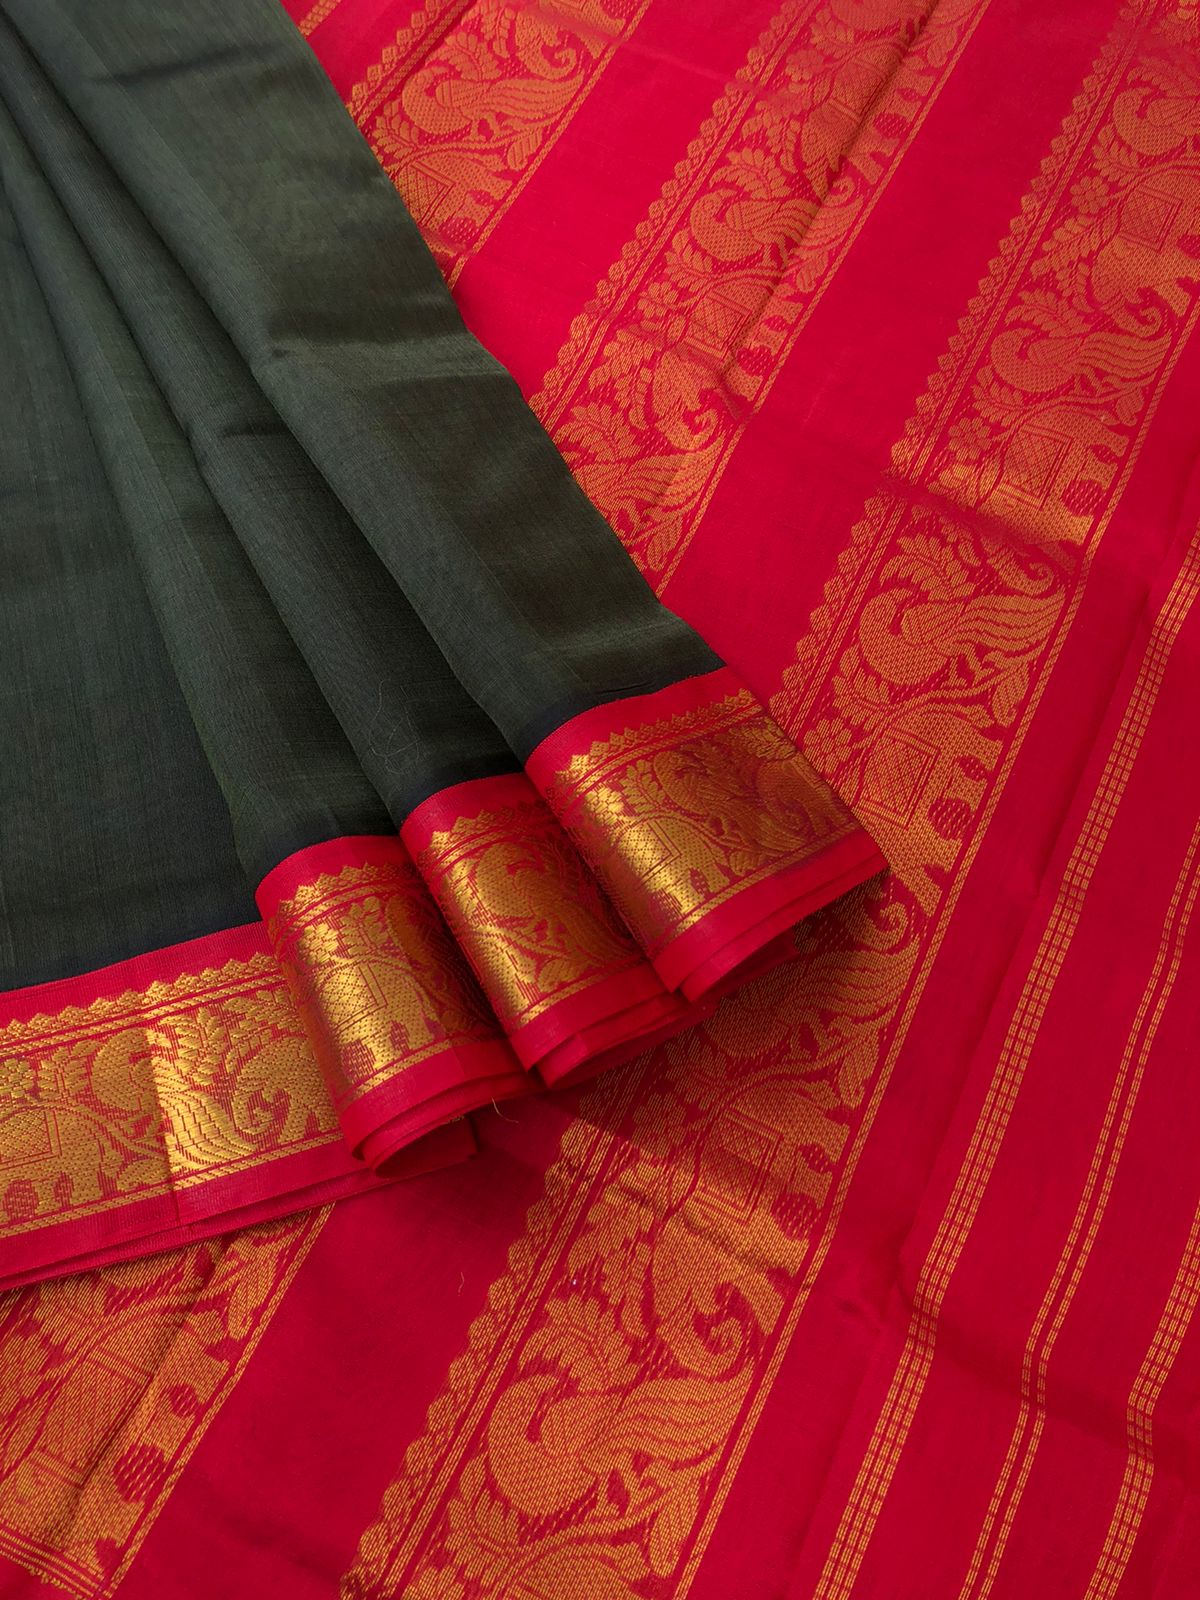 Korvai Silk Cotton - deep dark army green and red